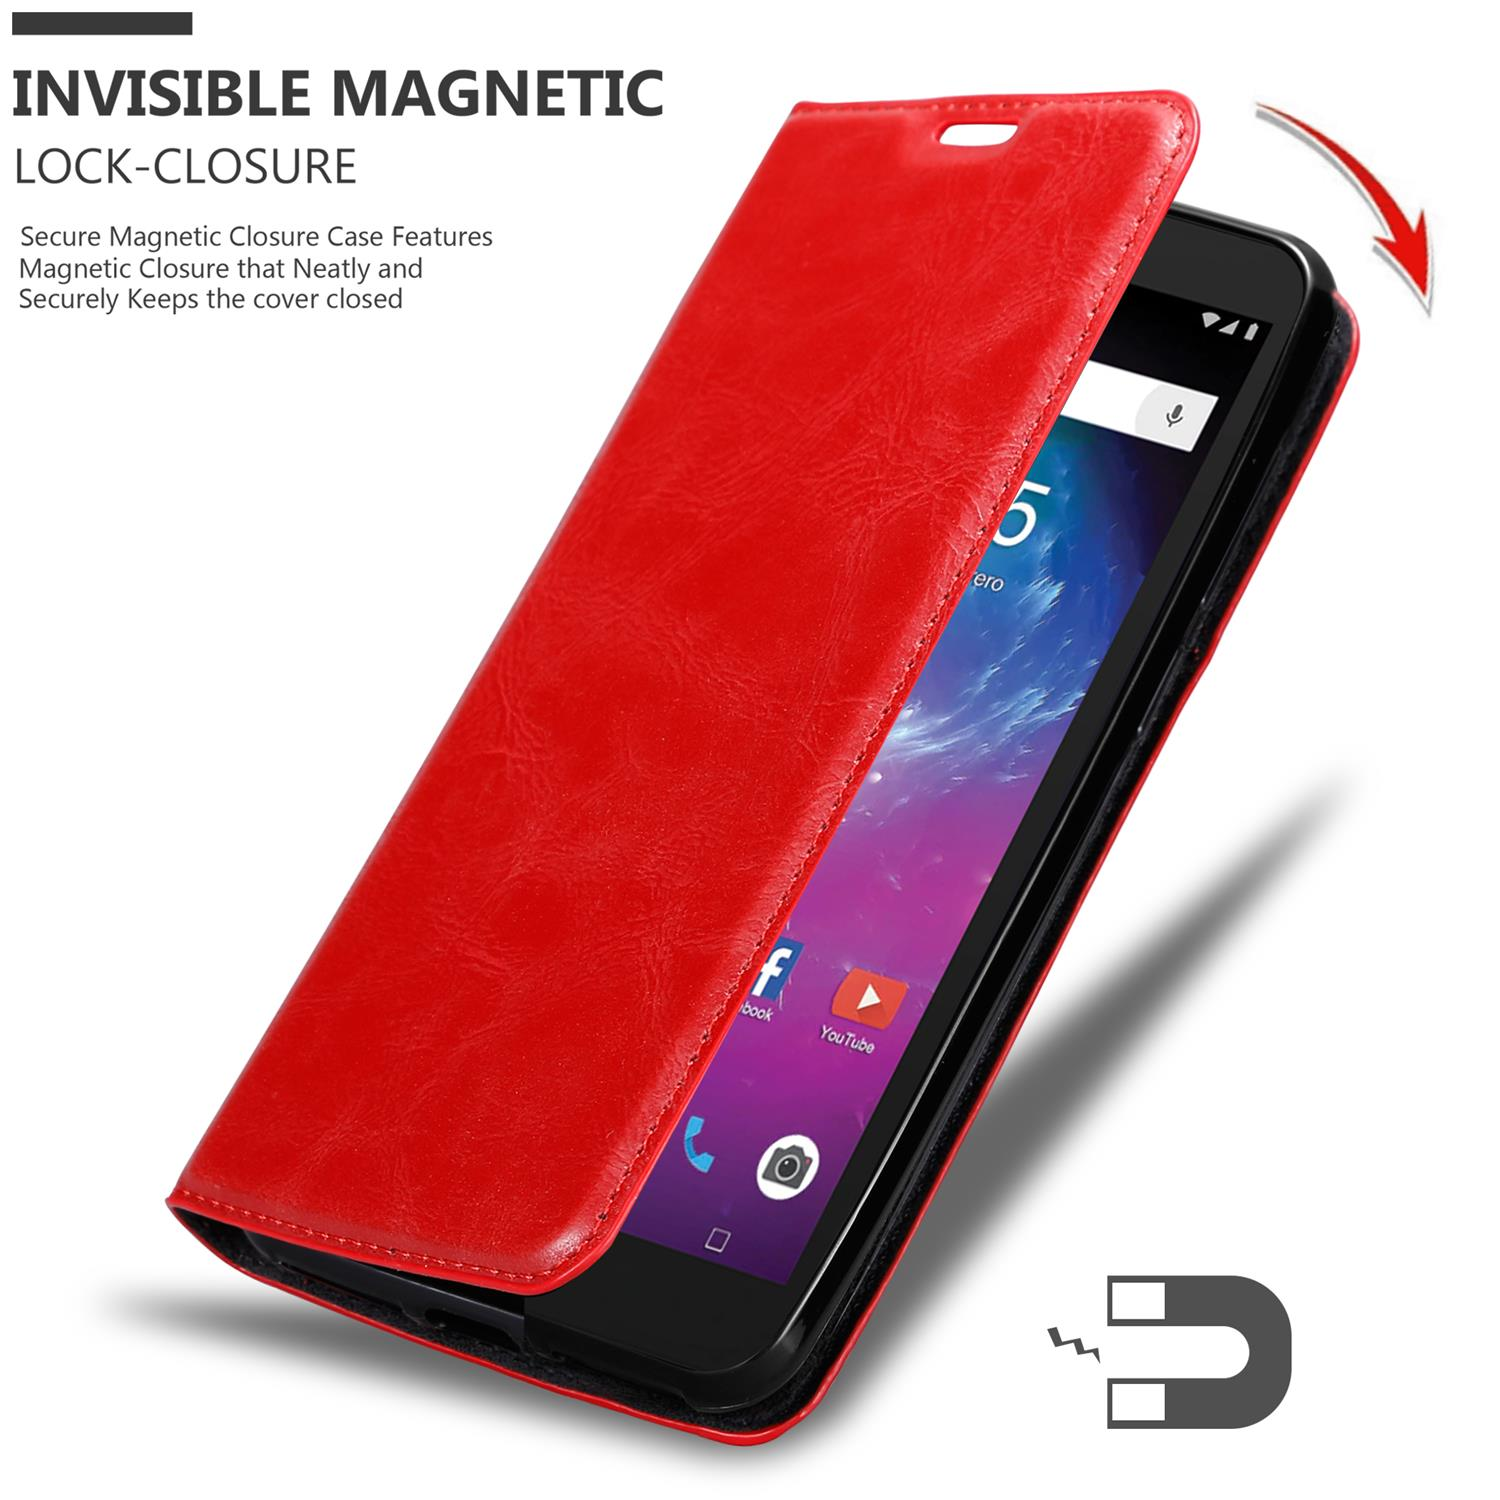 Magnet, CADORABO Invisible Hülle Book Bookcover, L8, ZTE, Blade ROT APFEL